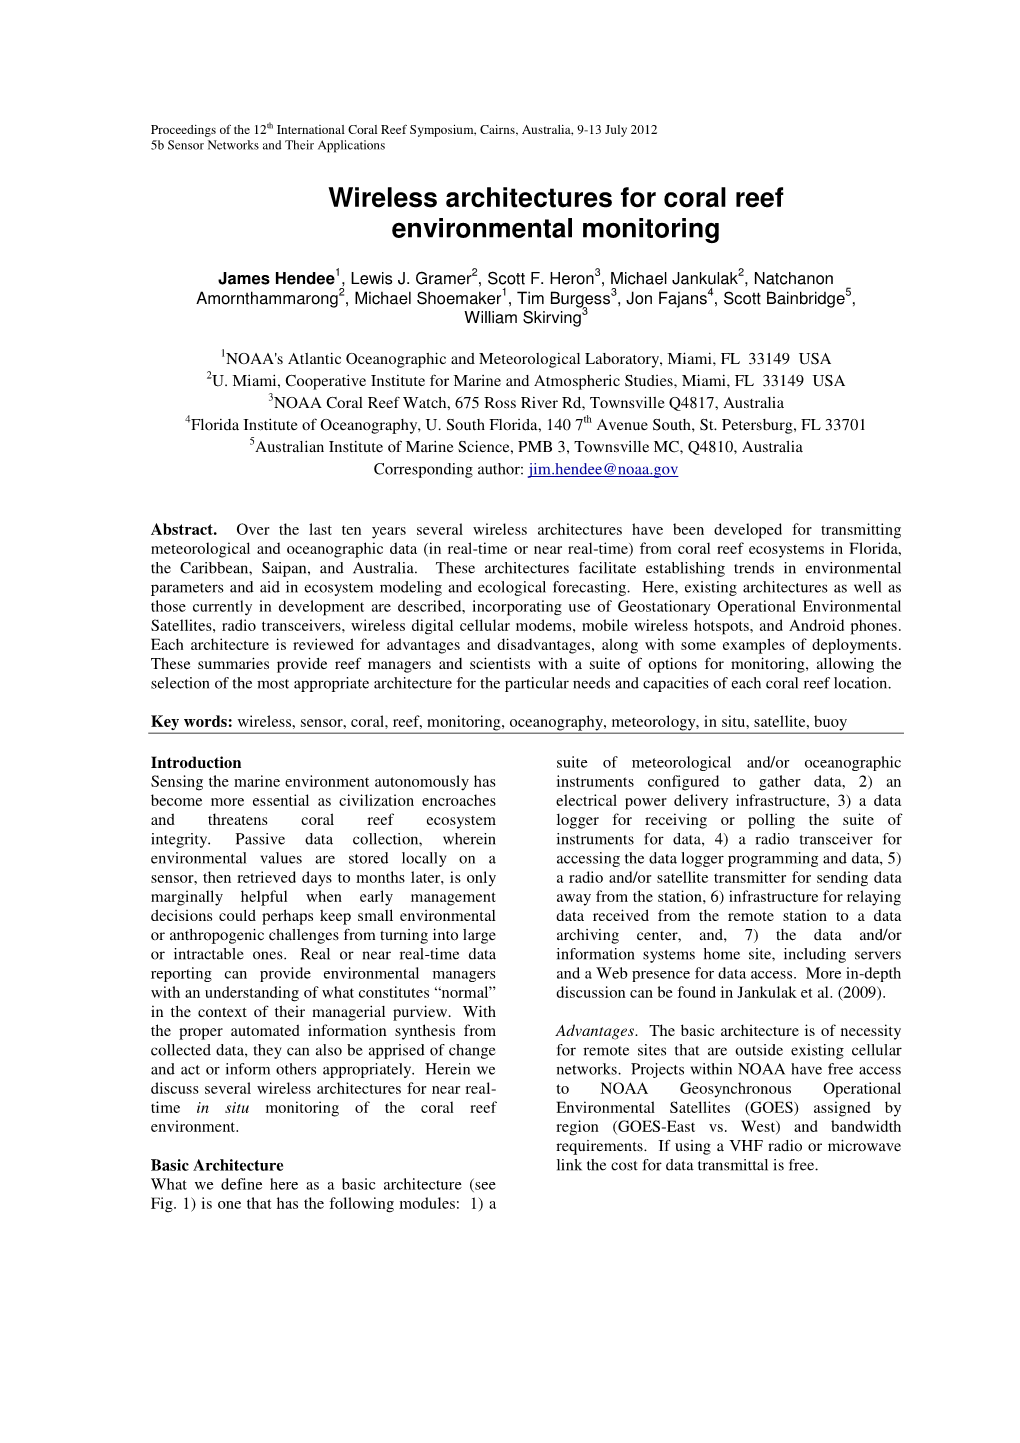 Wireless Architectures for Coral Reef Environmental Monitoring